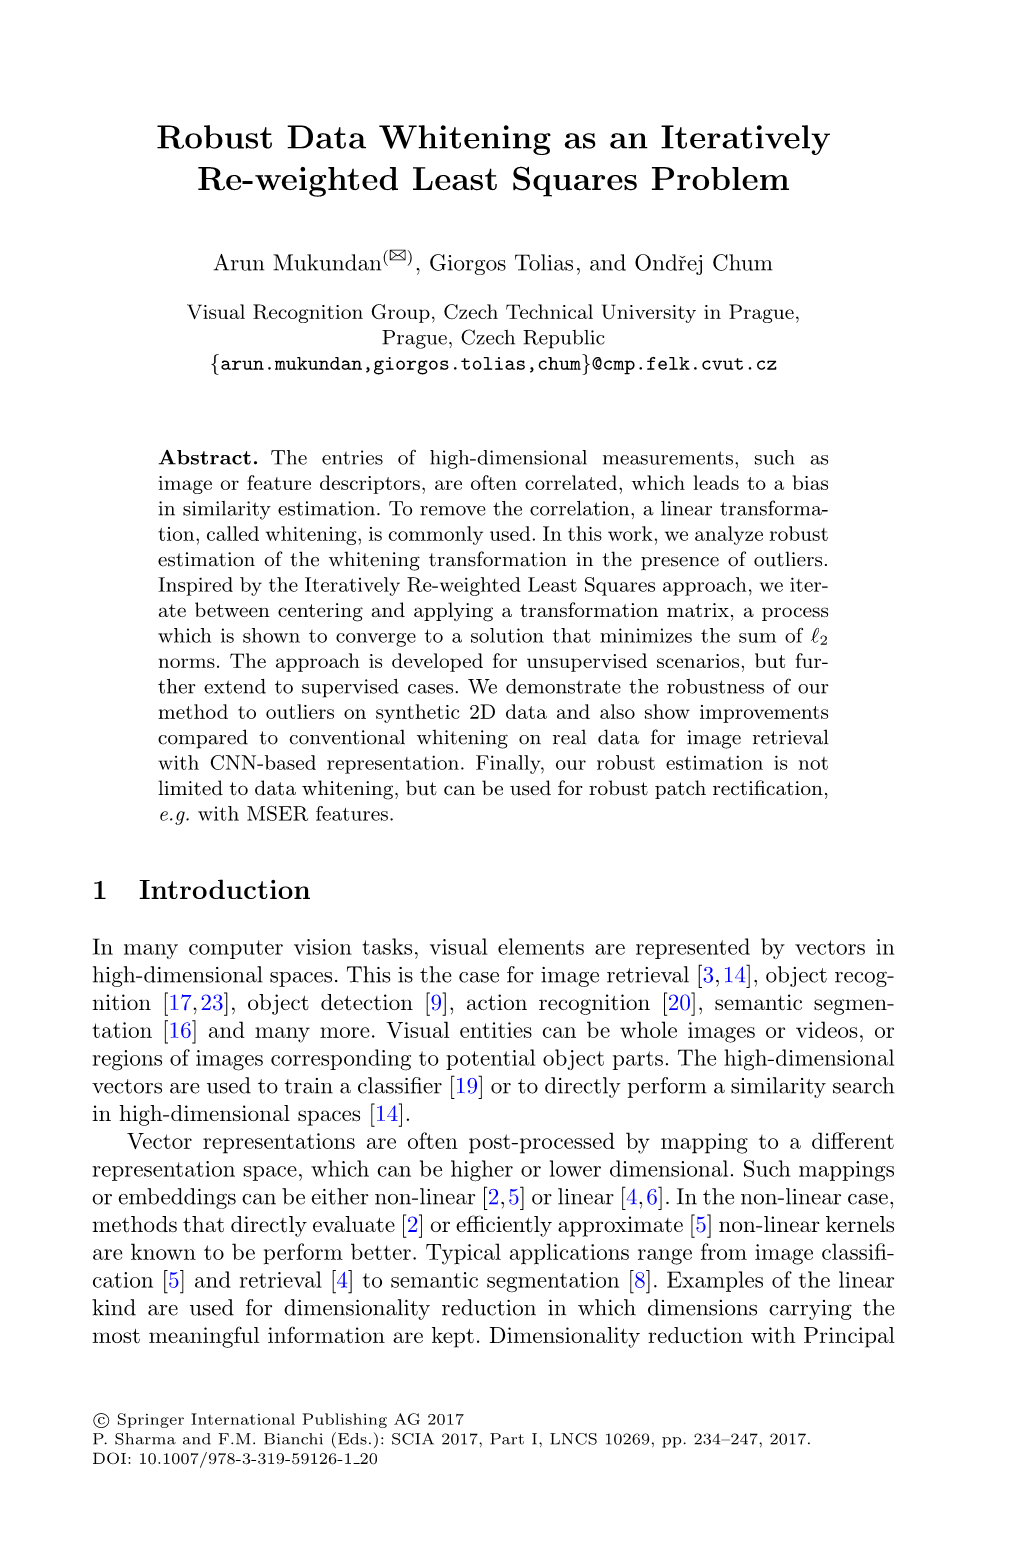 Robust Data Whitening As an Iteratively Re-Weighted Least Squares Problem